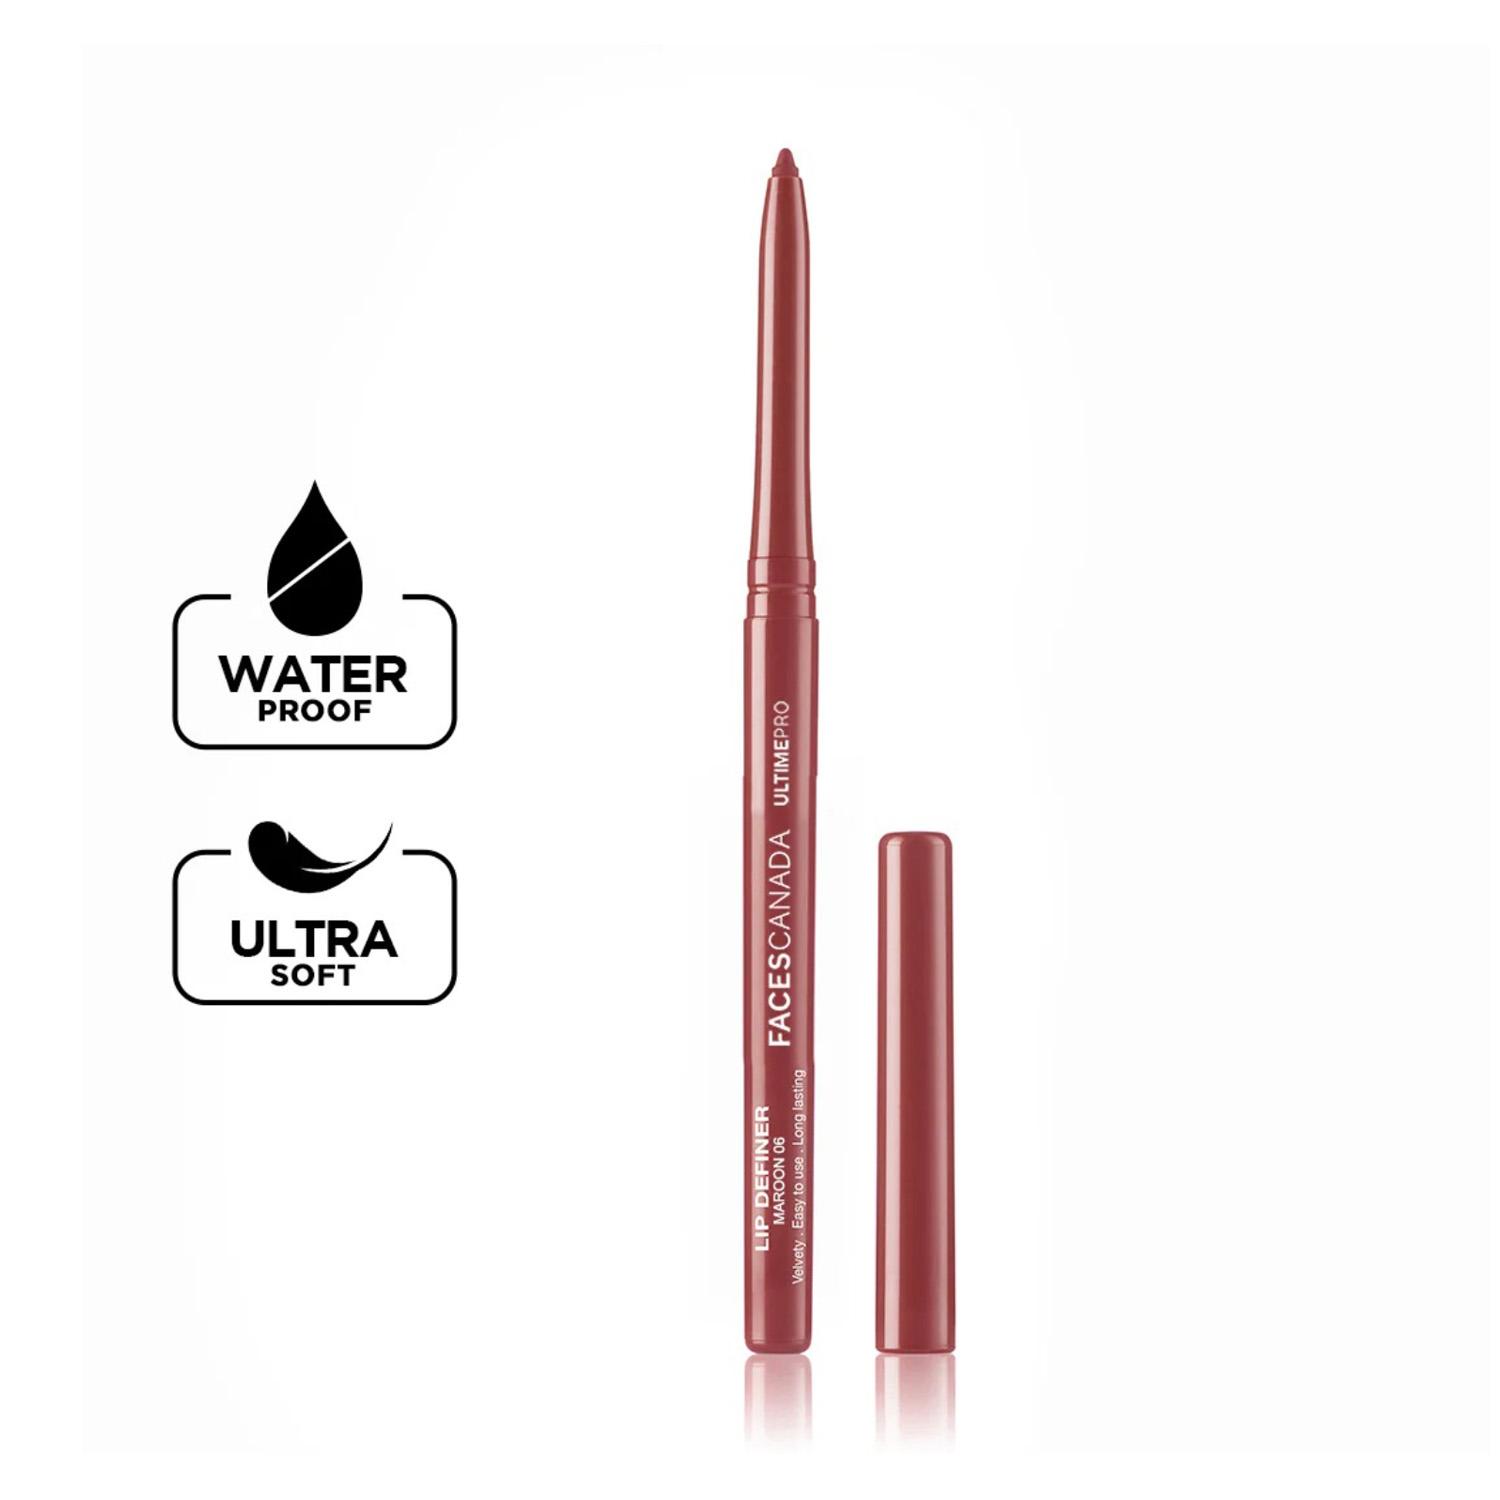 Faces Canada | Faces Canada Ultime Pro Lip Definer - Maroon, Extremely Soft & Gliding, Anti-Feathering (0.35 g)